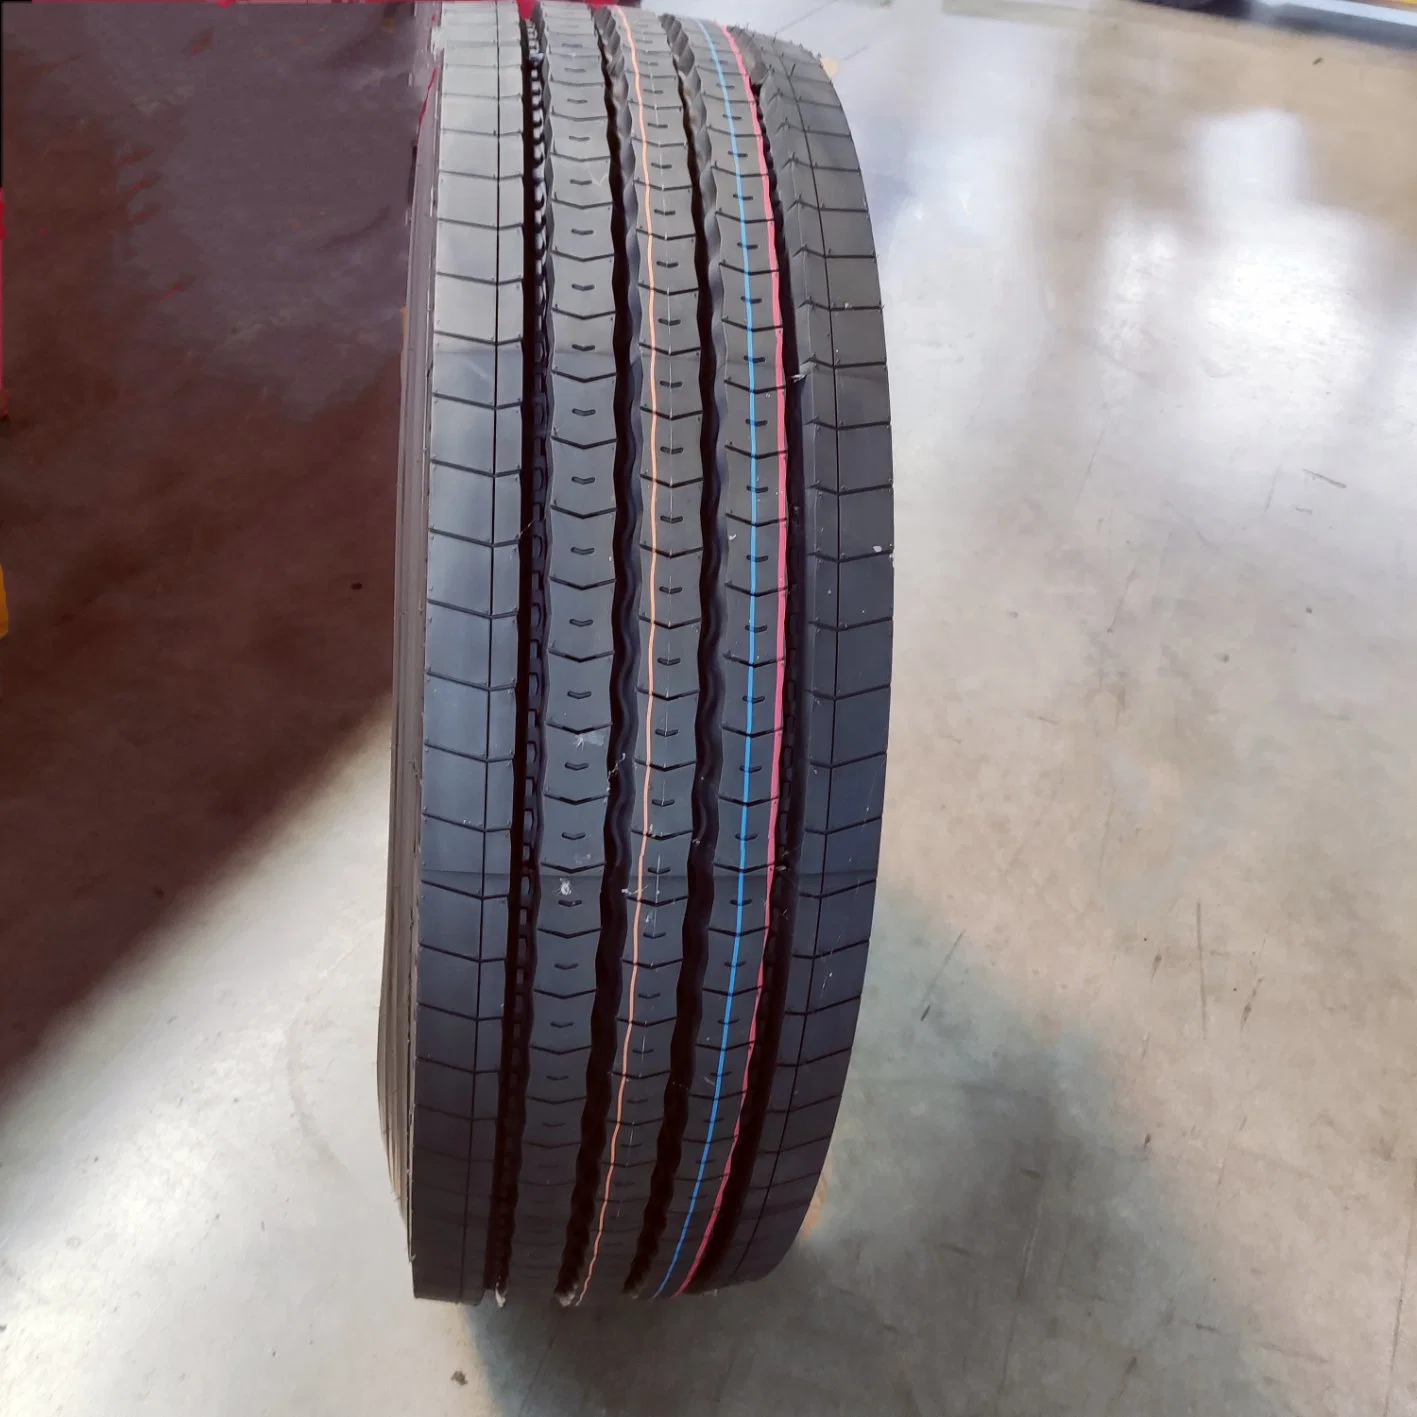 China Wholesale/Supplier Radial Truck Tyre, Bus Tyre, TBR Tyre, Car Tyres, Passenger Car Tyre, OEM Tyre